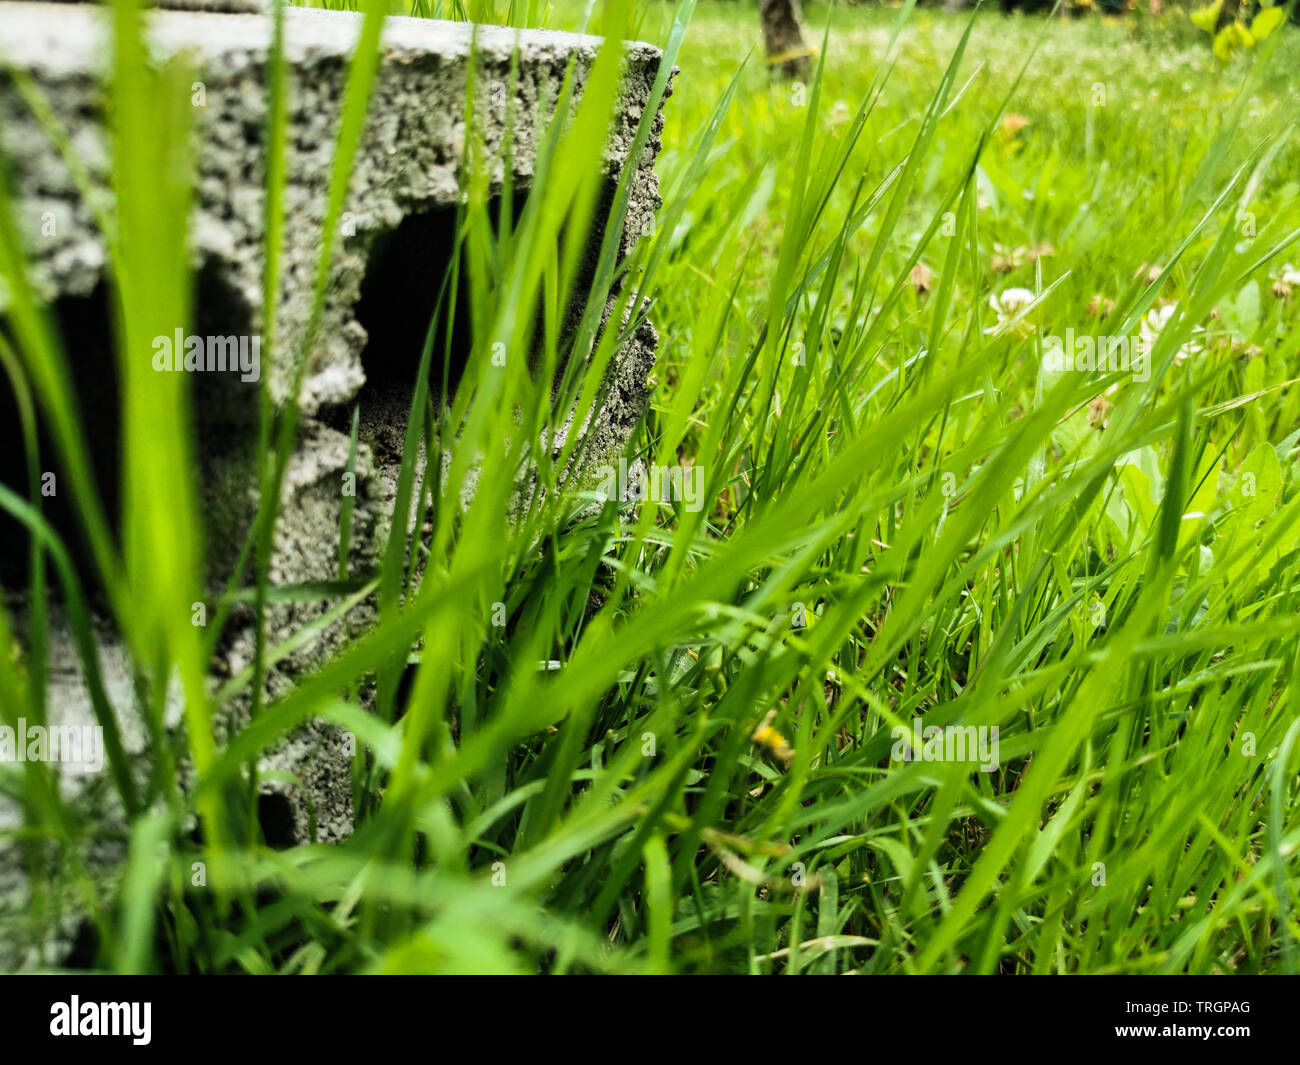 abandoned concrete brick in the middle of a green lawn Stock Photo